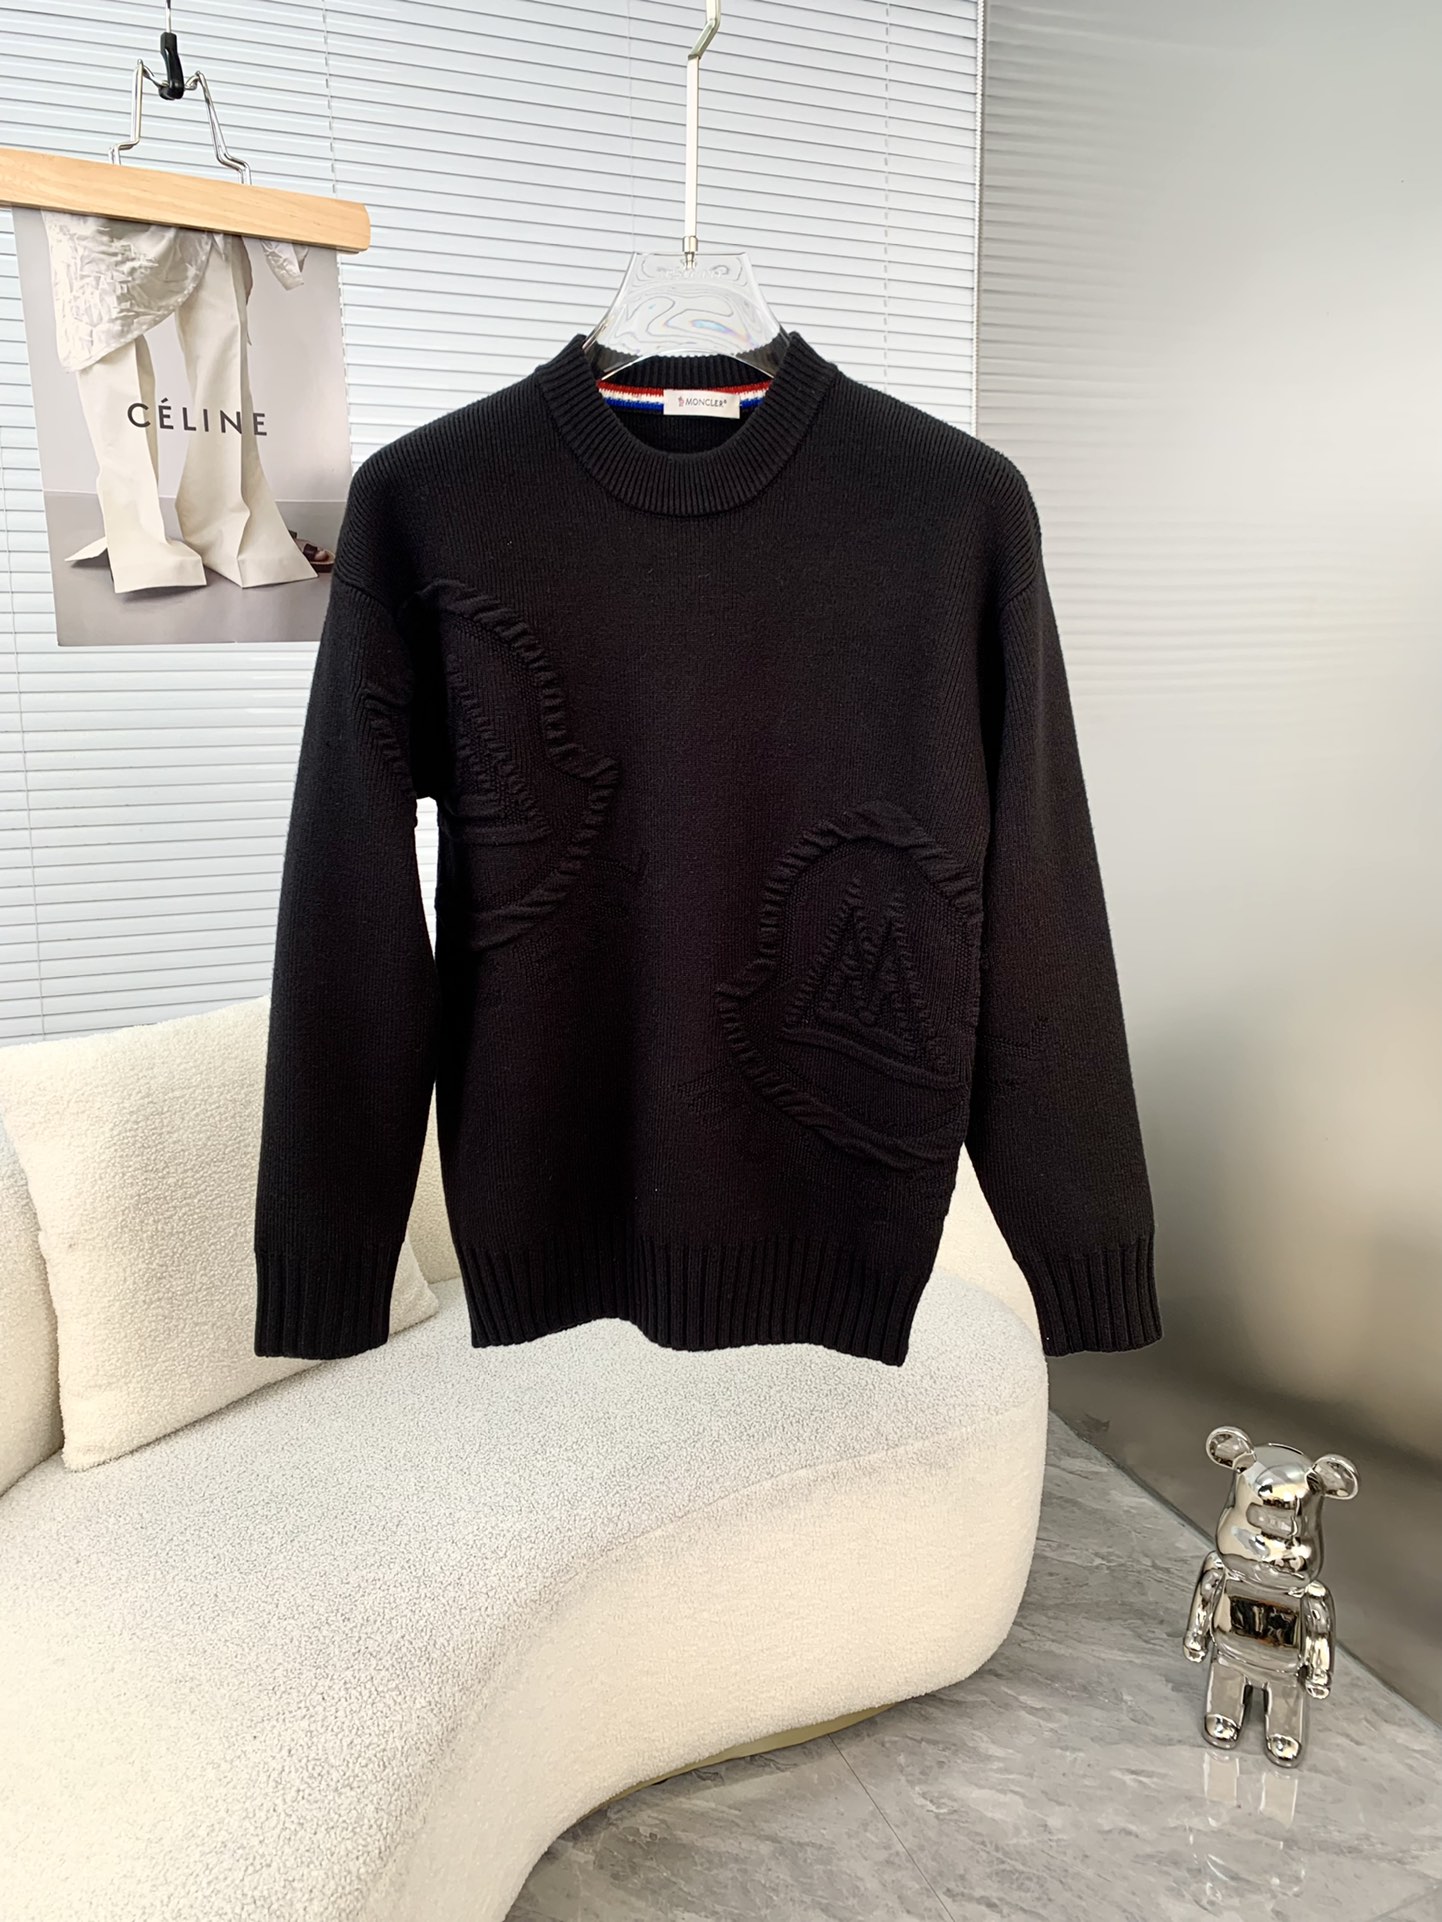 Moncler Clothing Sweatshirts Black Grey White Fall/Winter Collection